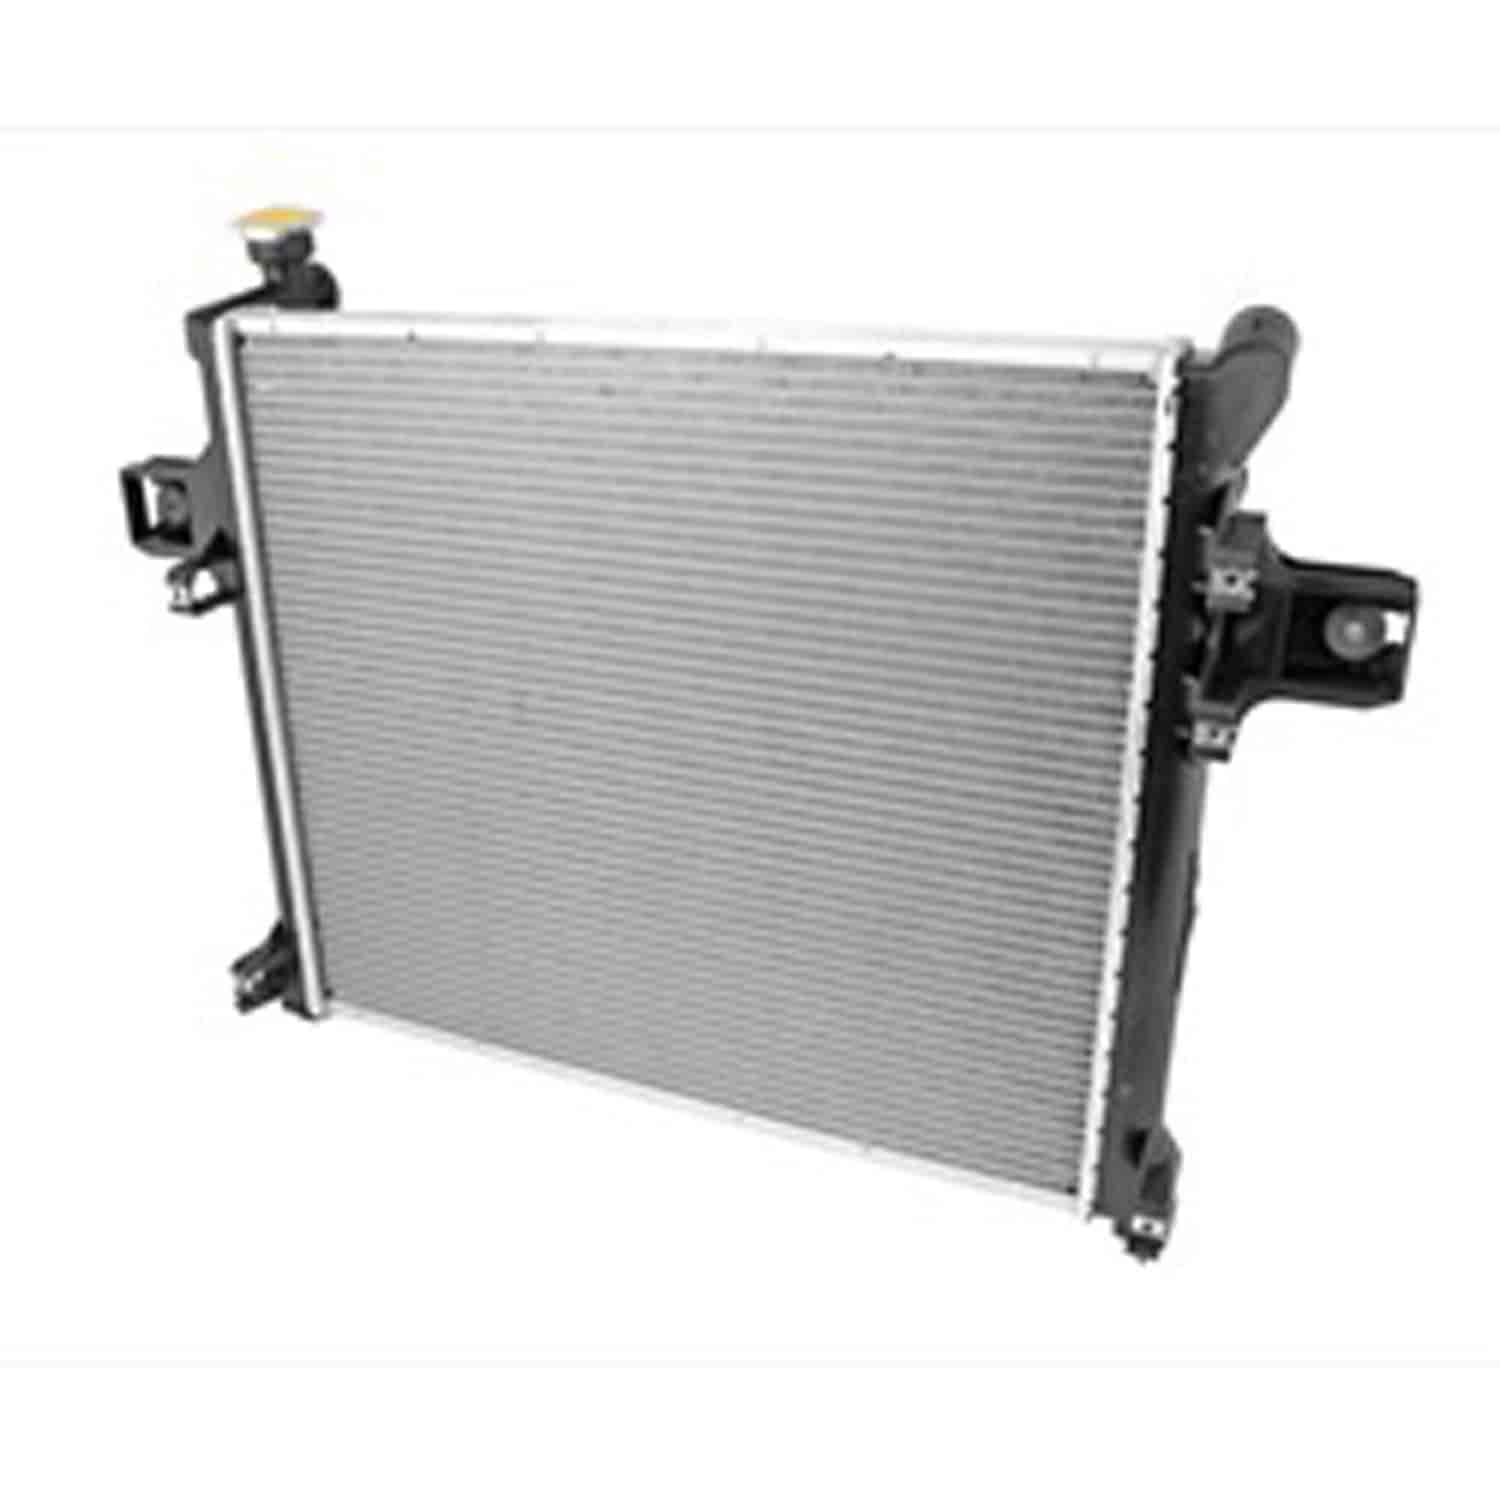 This 1 row radiator from Omix-ADA fits 02-05 Jeep Liberty KJ with a 2.4L engine.